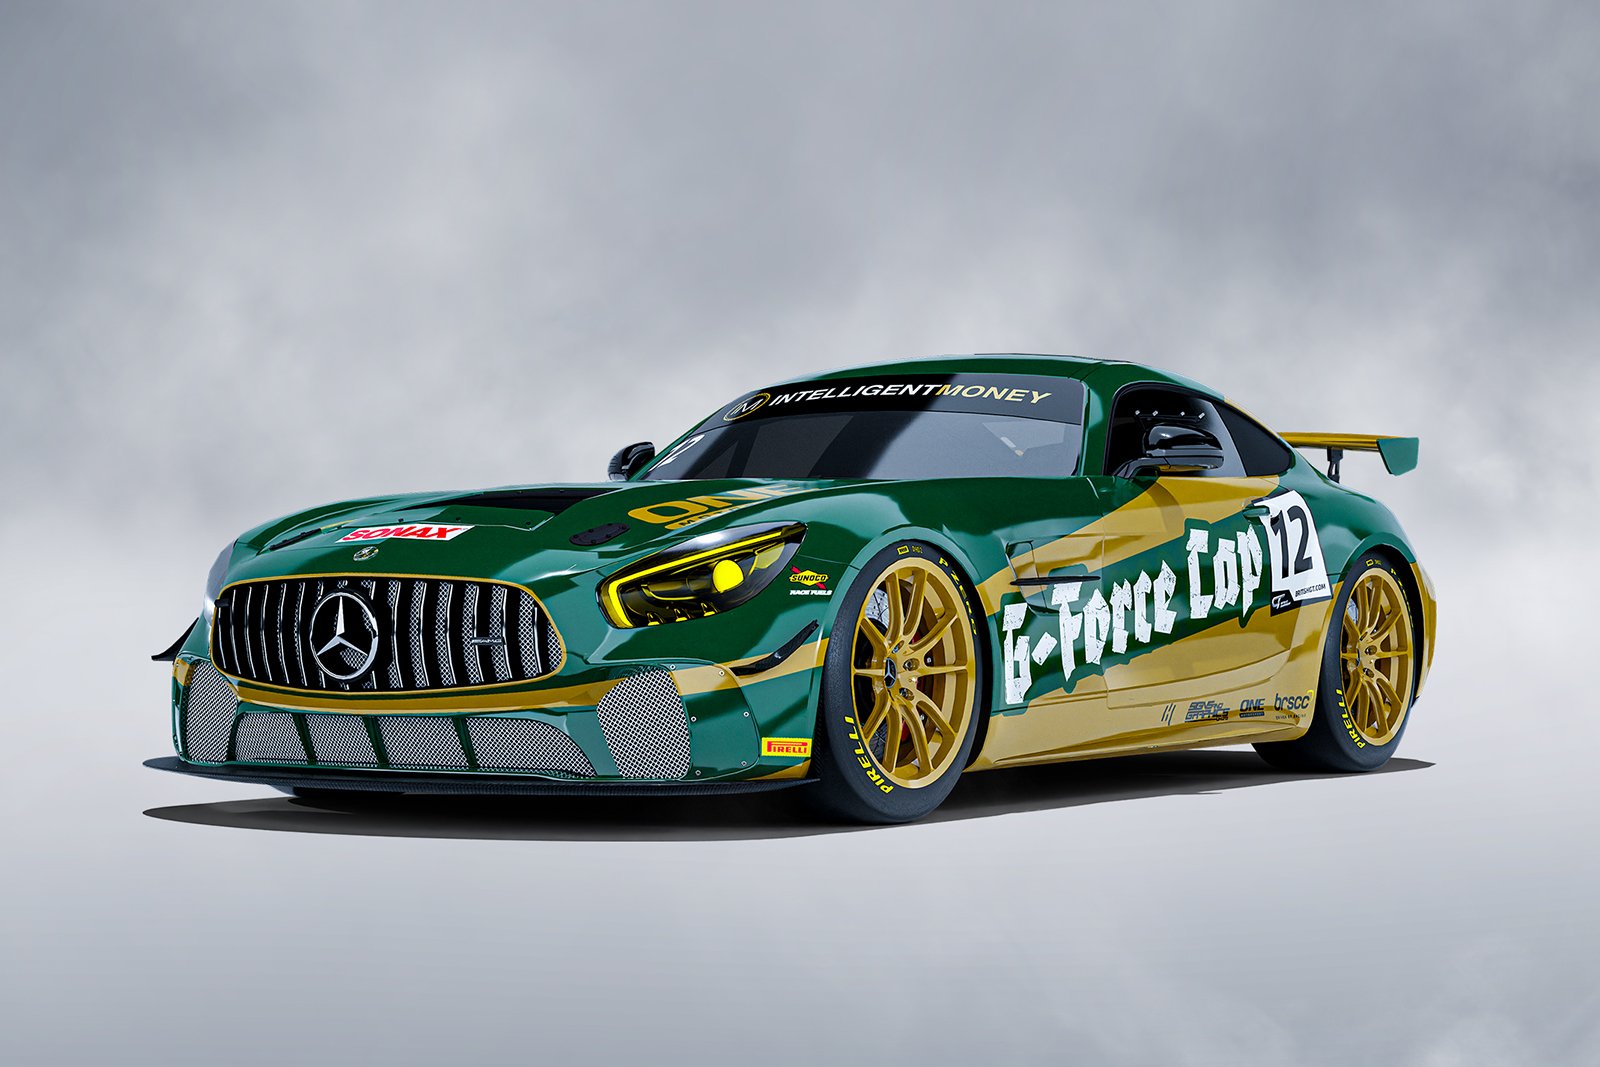 A rendering of the One Motorsport Mercedes-AMG GT4.